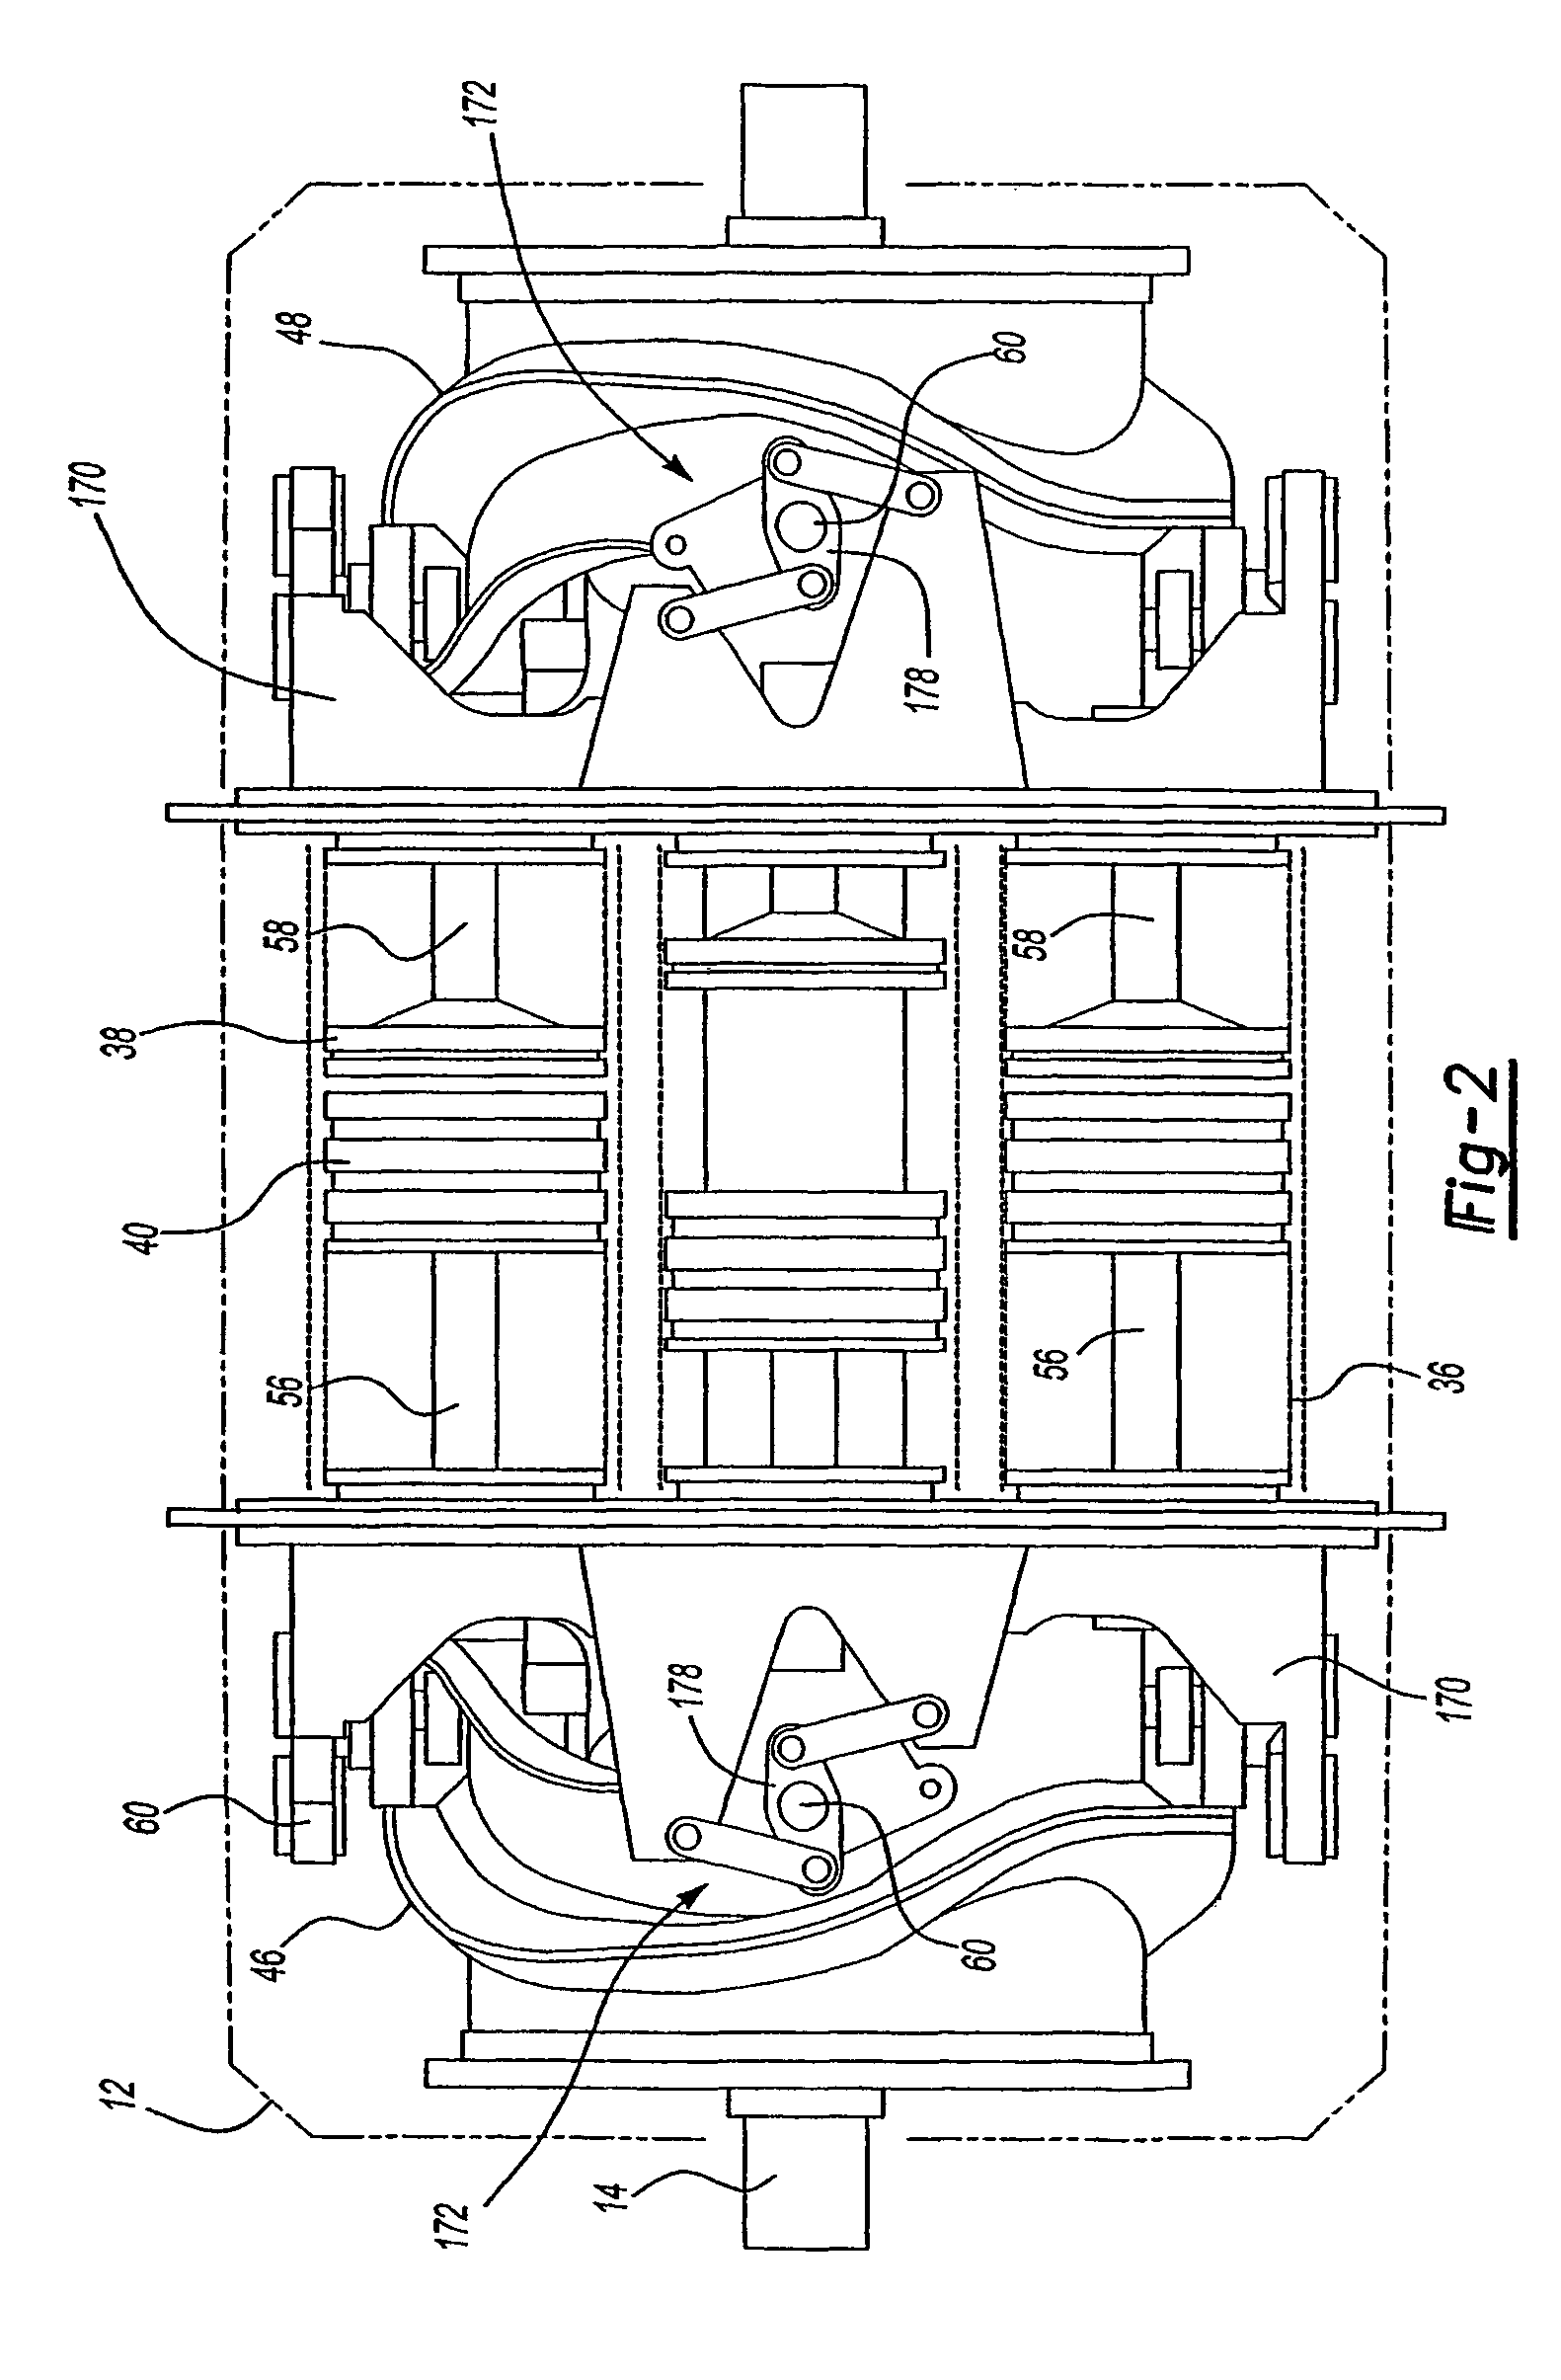 Internal combustion engine using opposed pistons